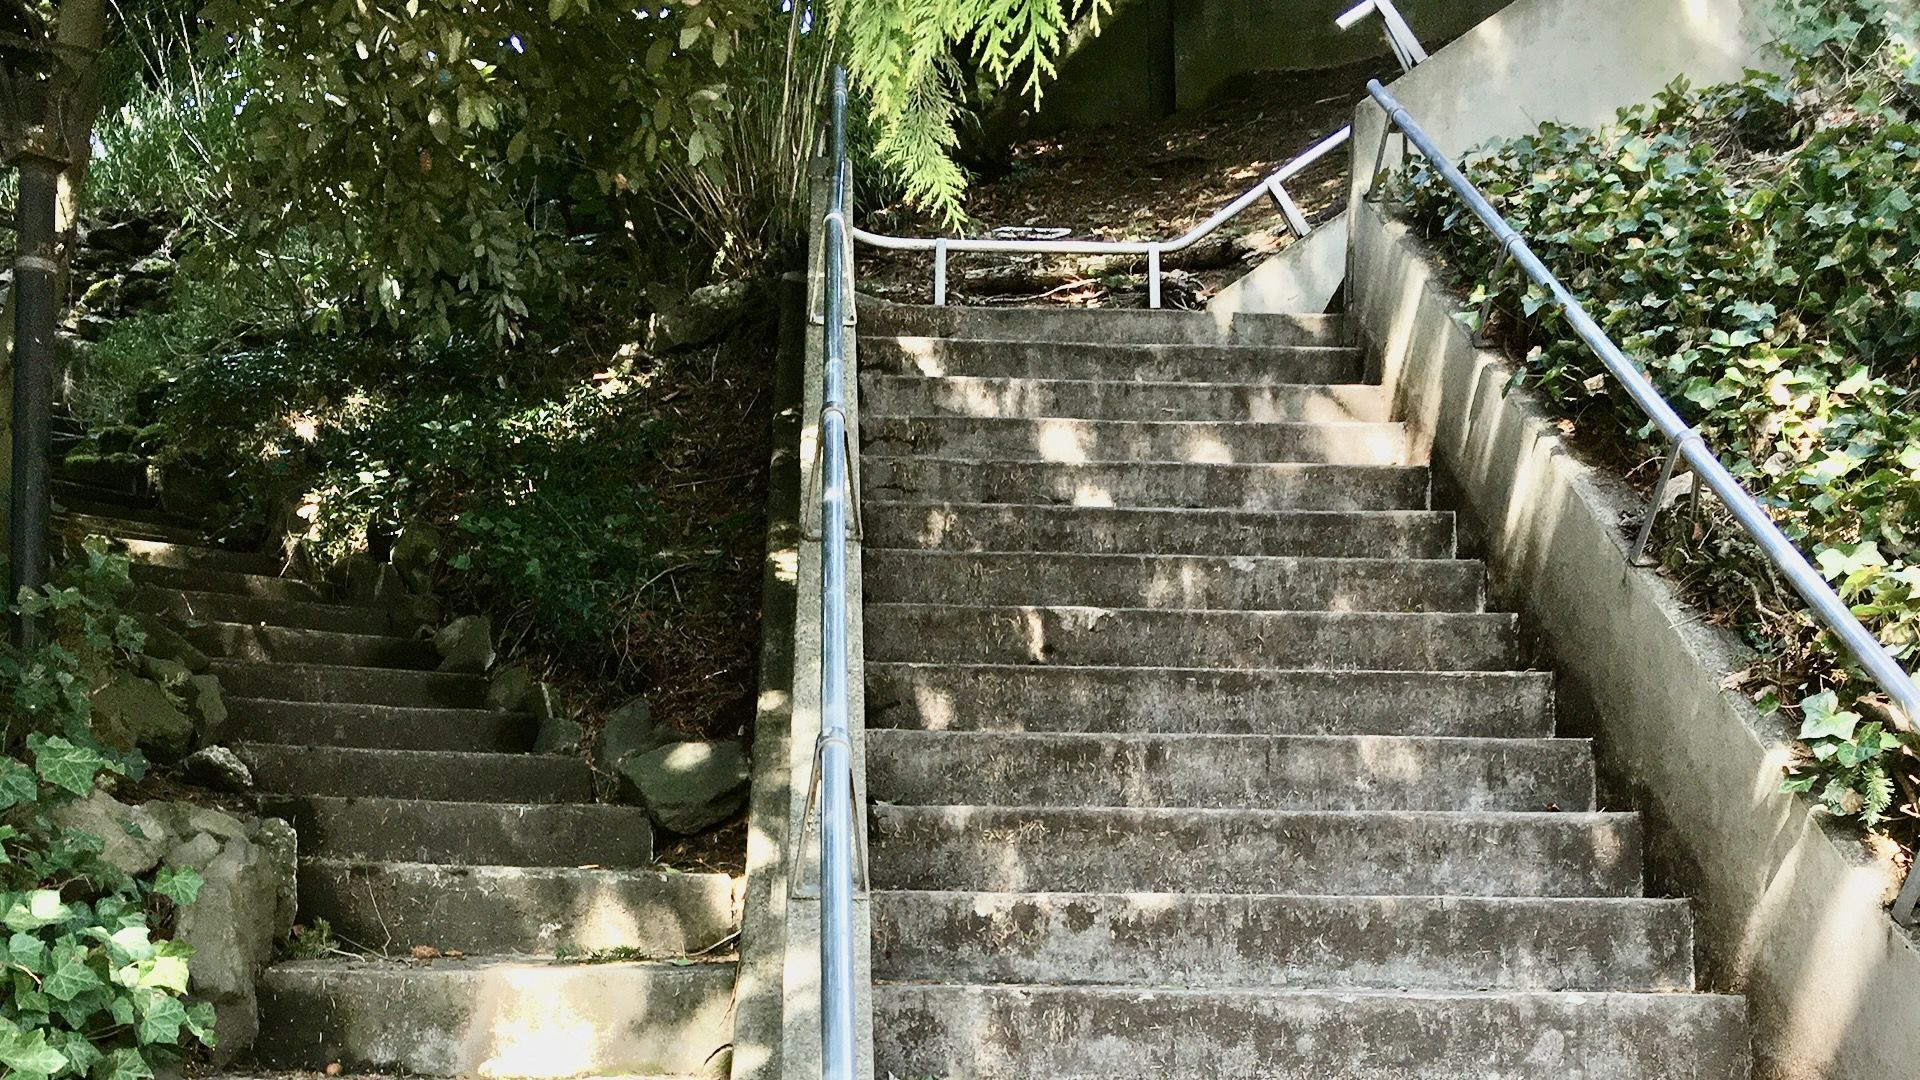 Two sets of outdoor concrete stairs rise right next to each other, though they go different places.